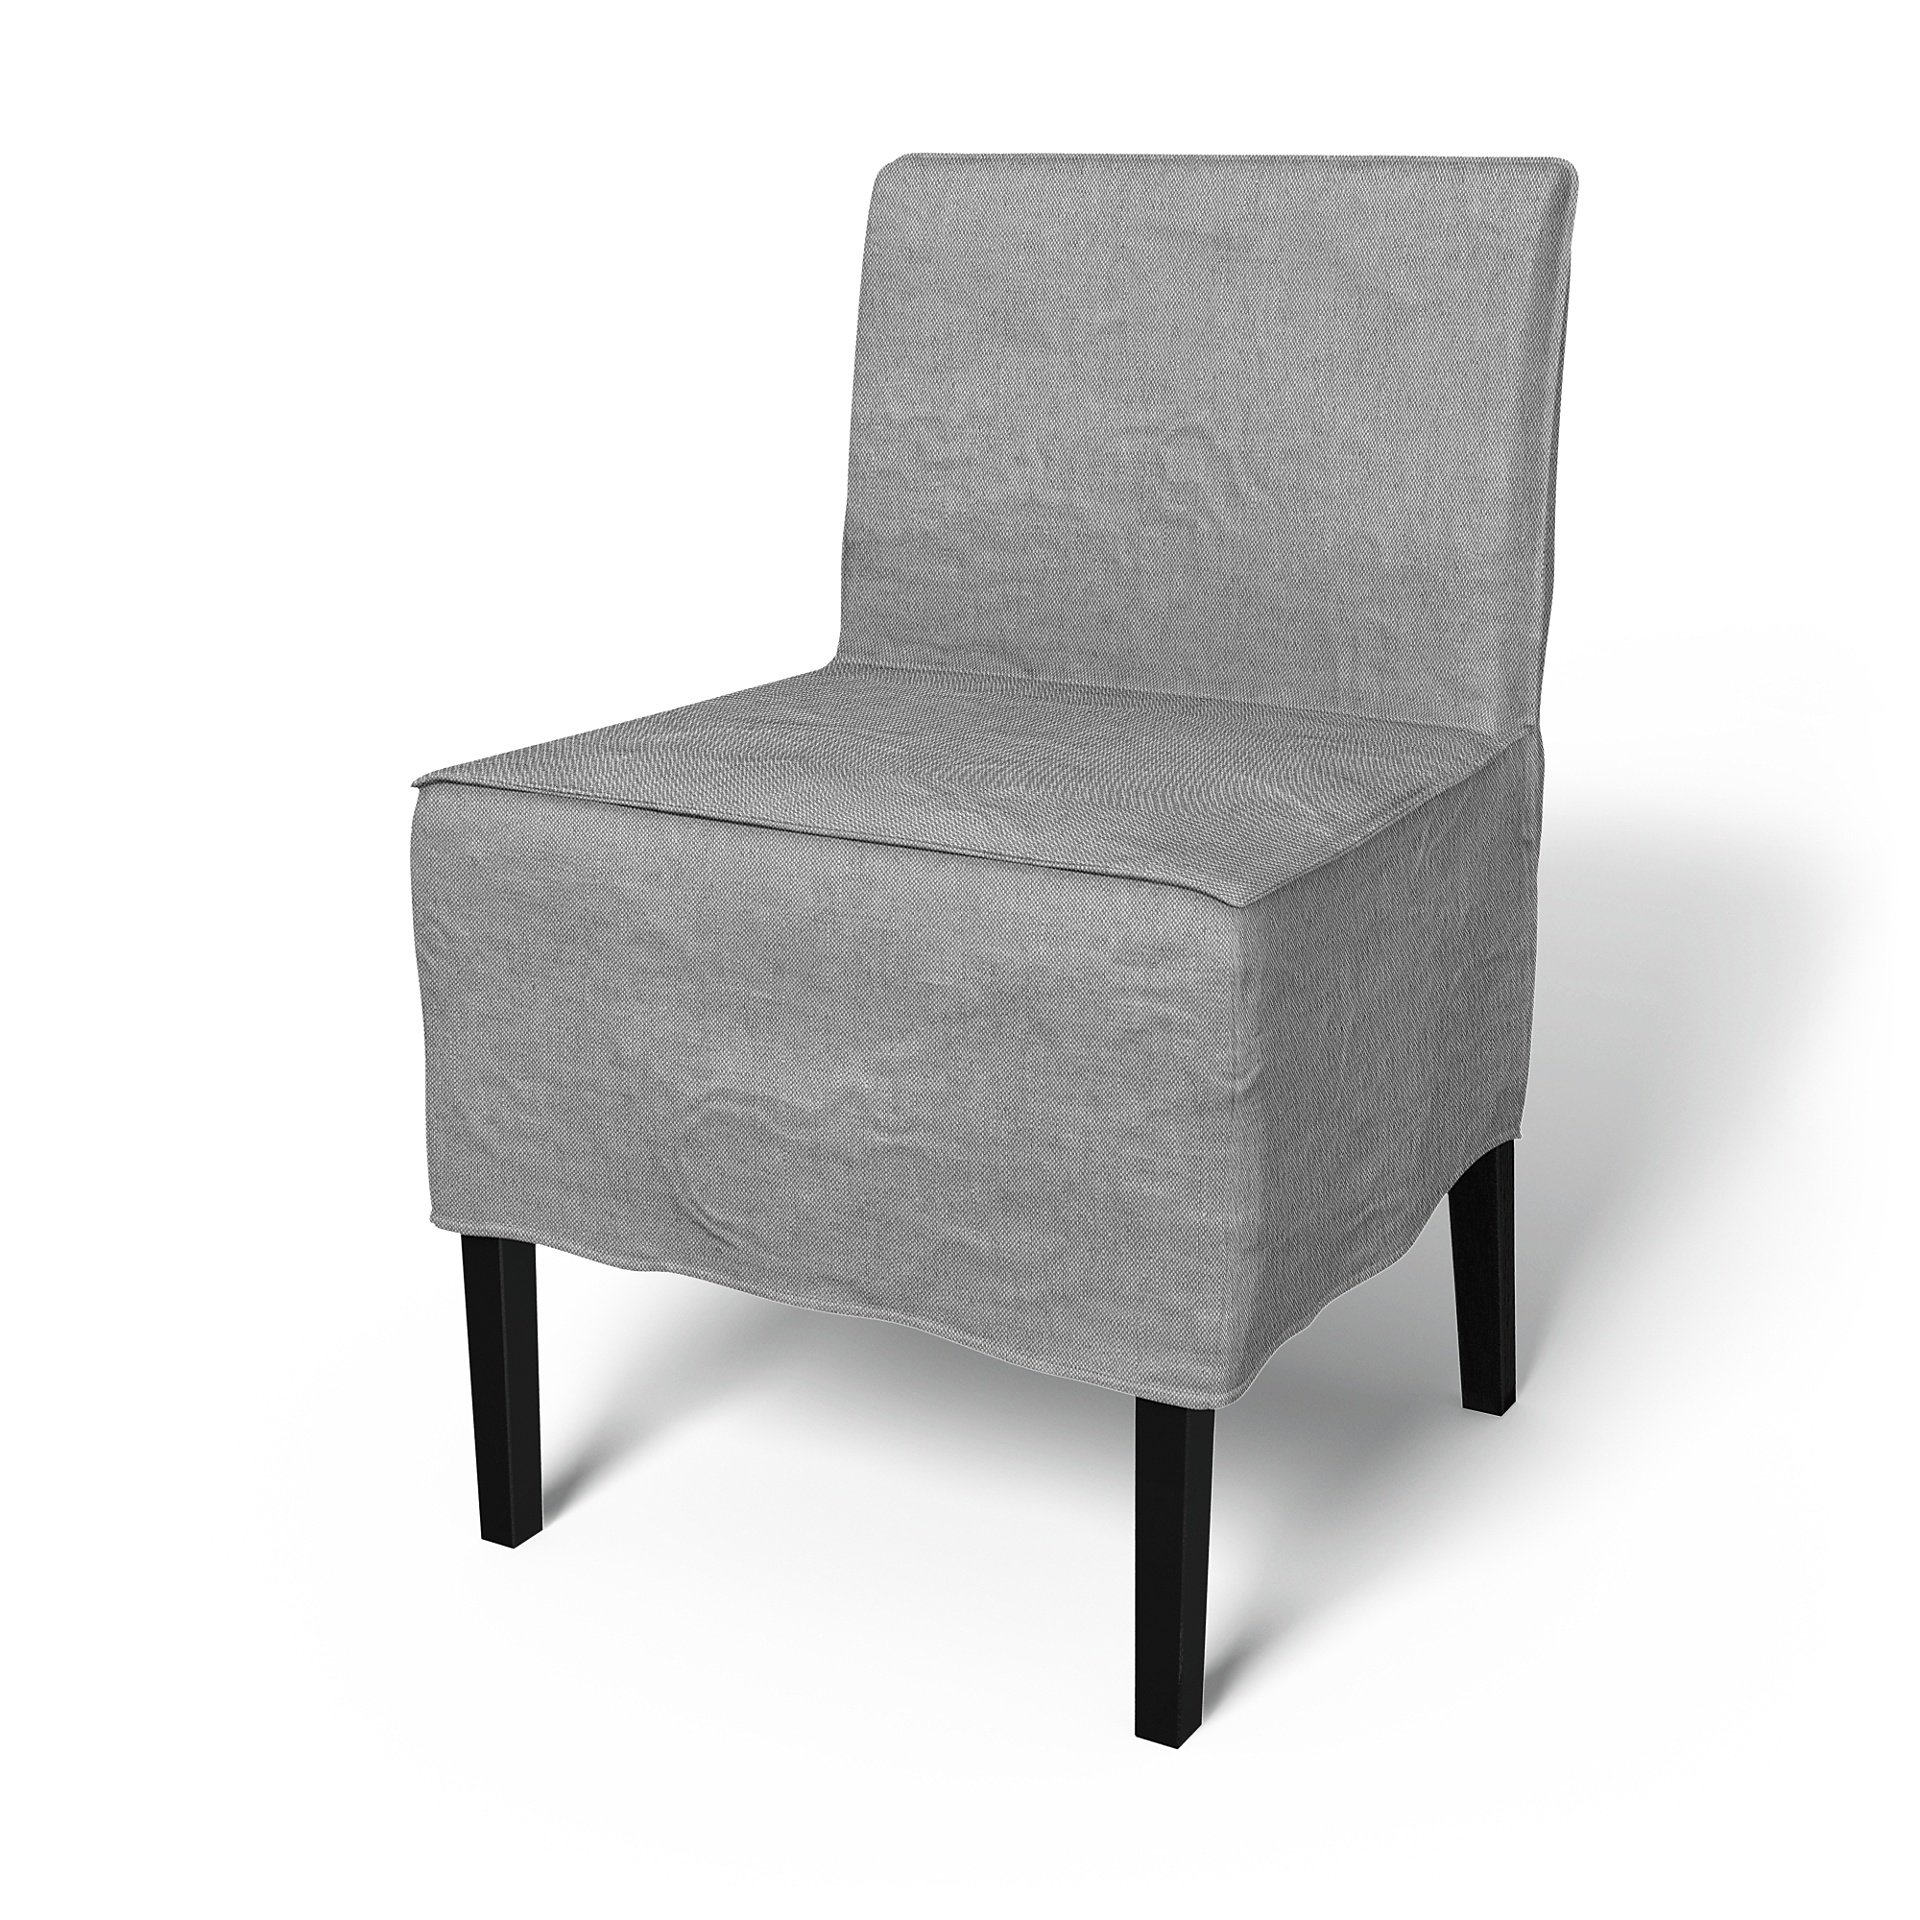 IKEA - Nils Dining Chair Cover, Graphite, Linen - Bemz